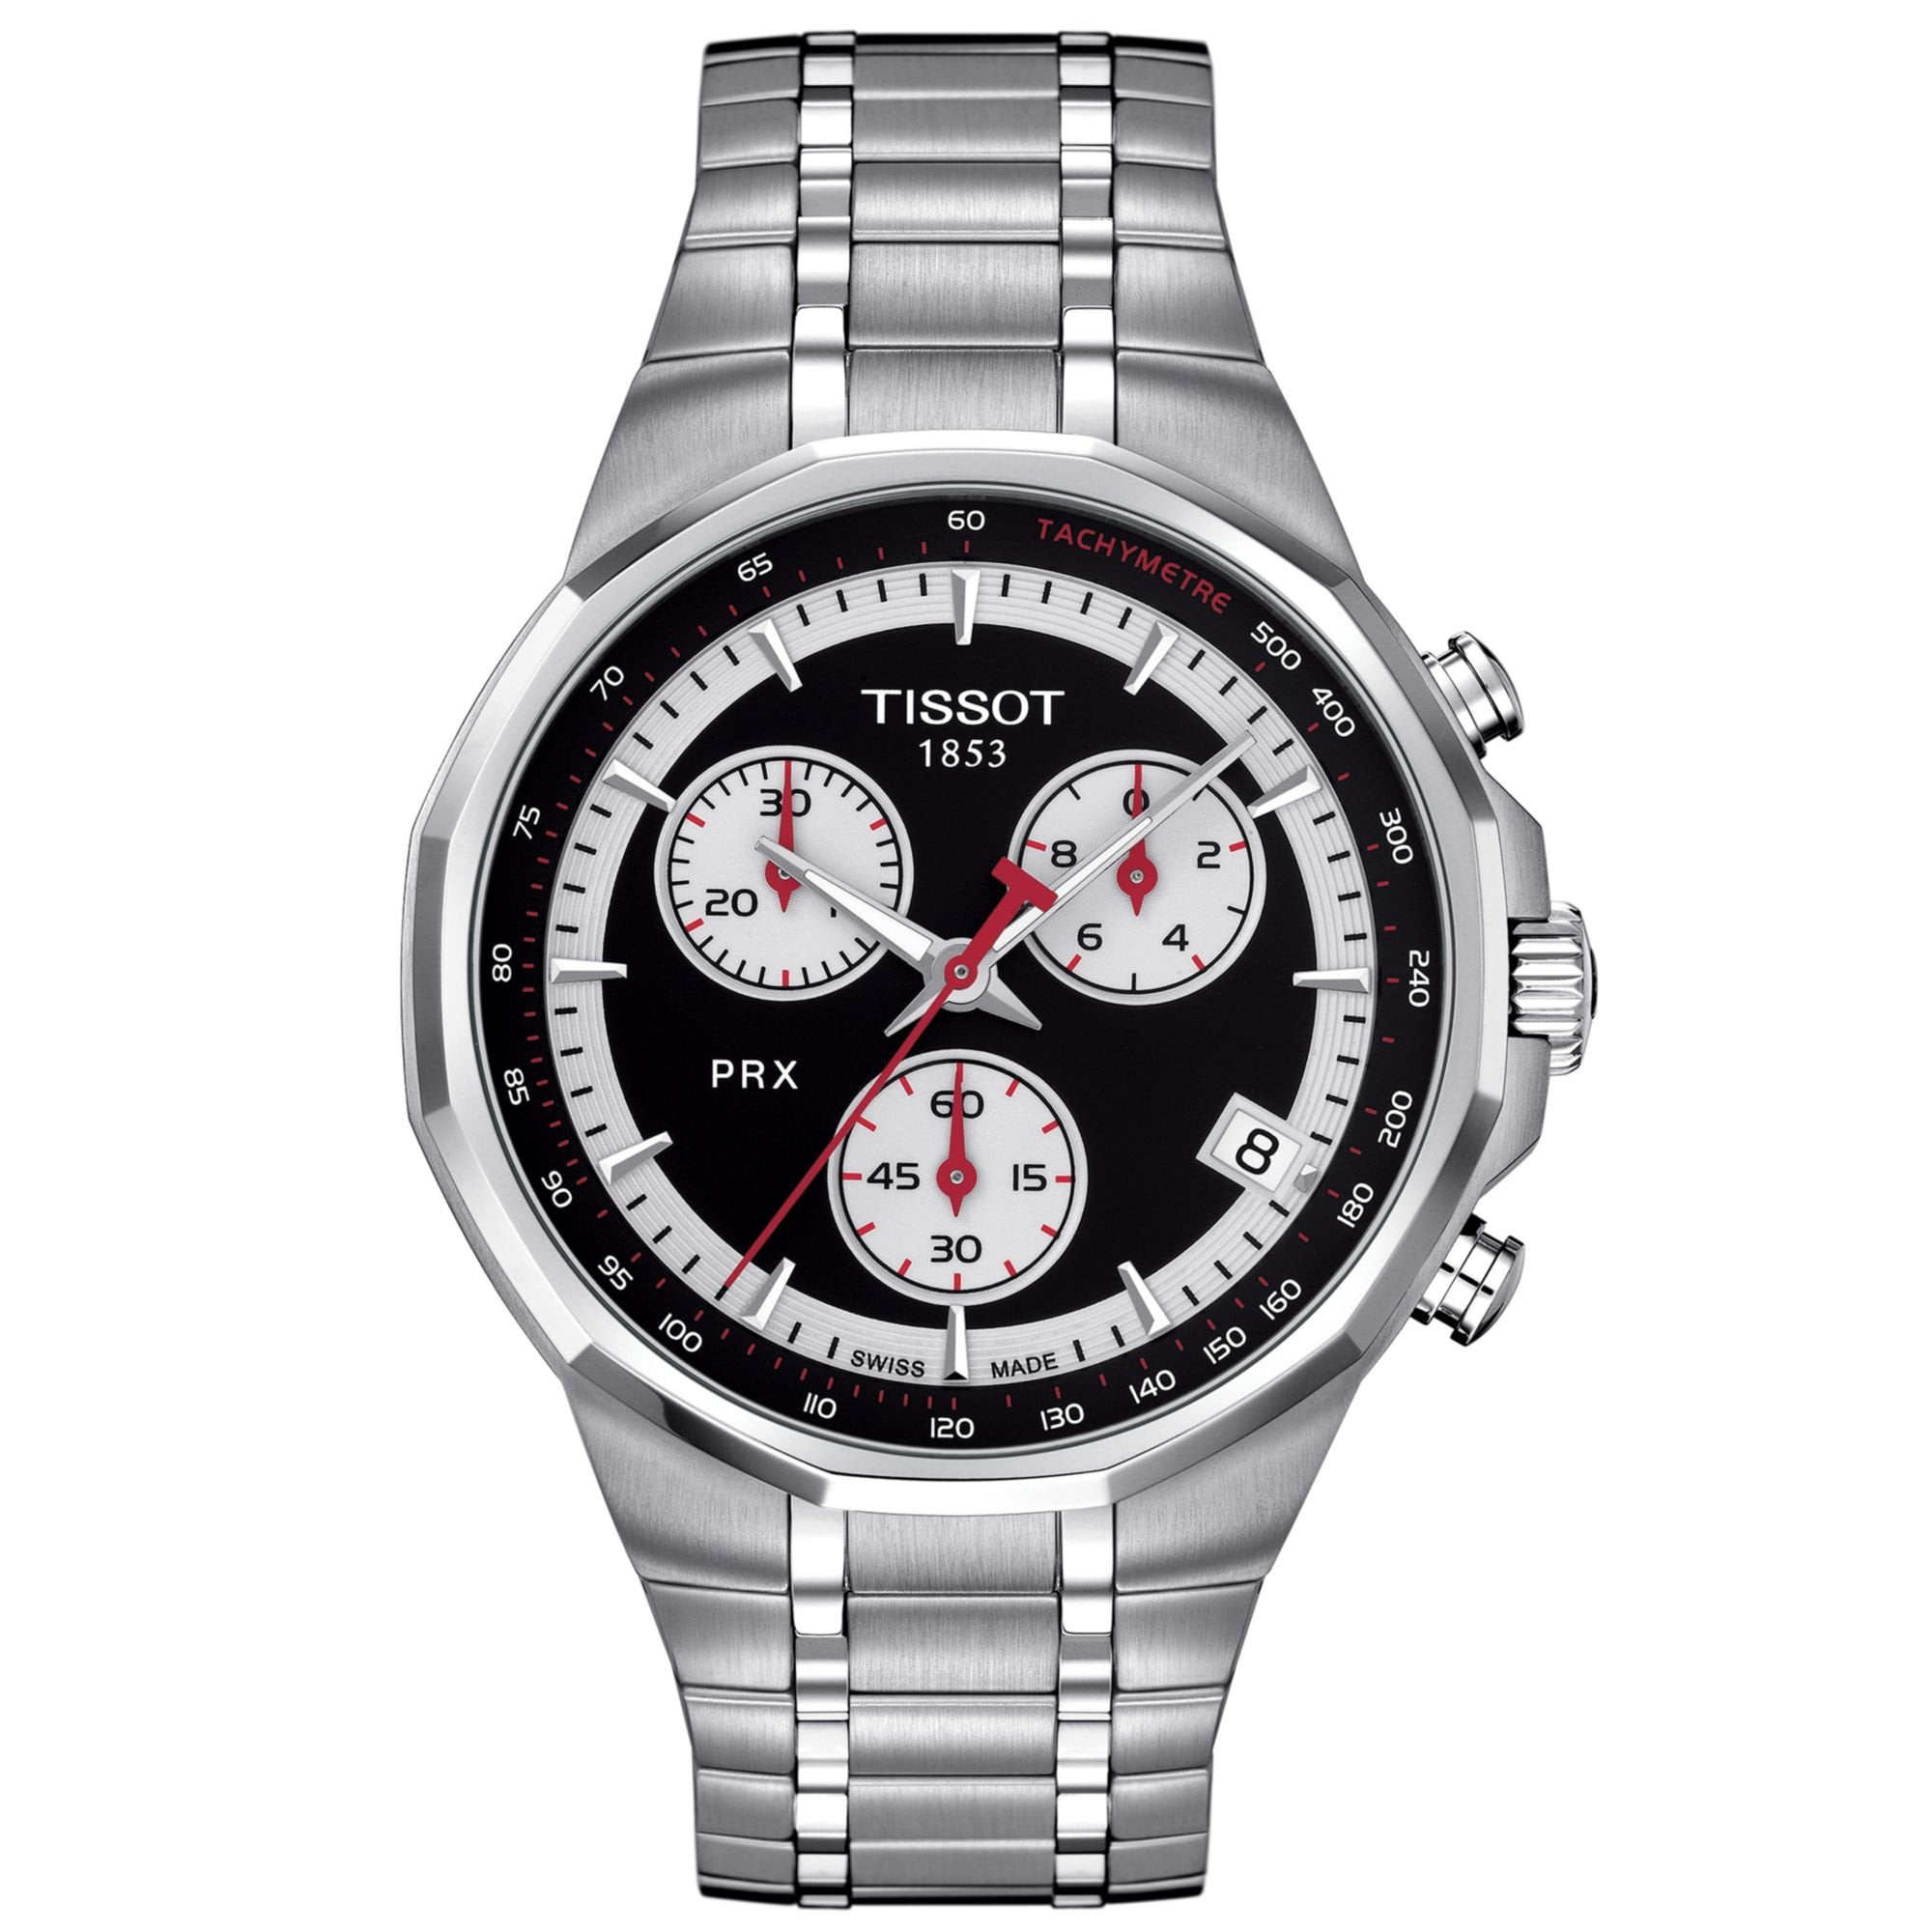 Tissot T077.417.11.051.11 PRX Special Edition Men's Watch Stainless ...